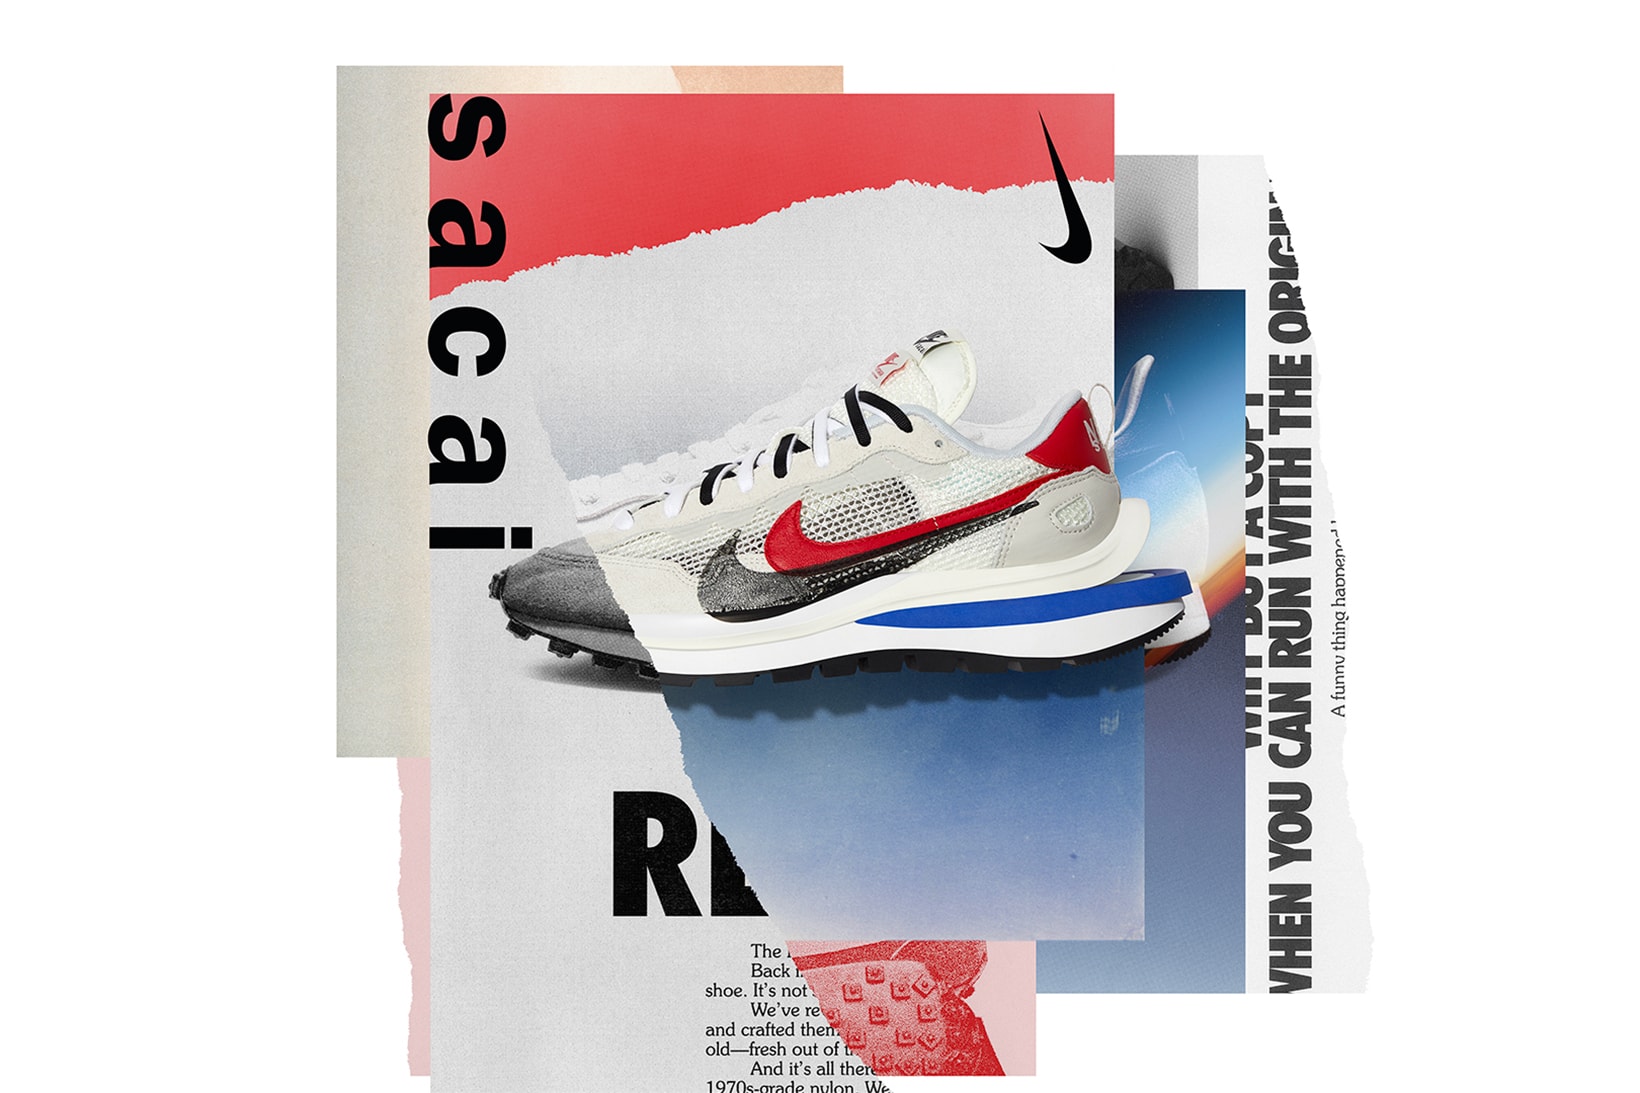 sacai nike vaporwaffle black summit white red blue burgundy sneakers collaboration release date info